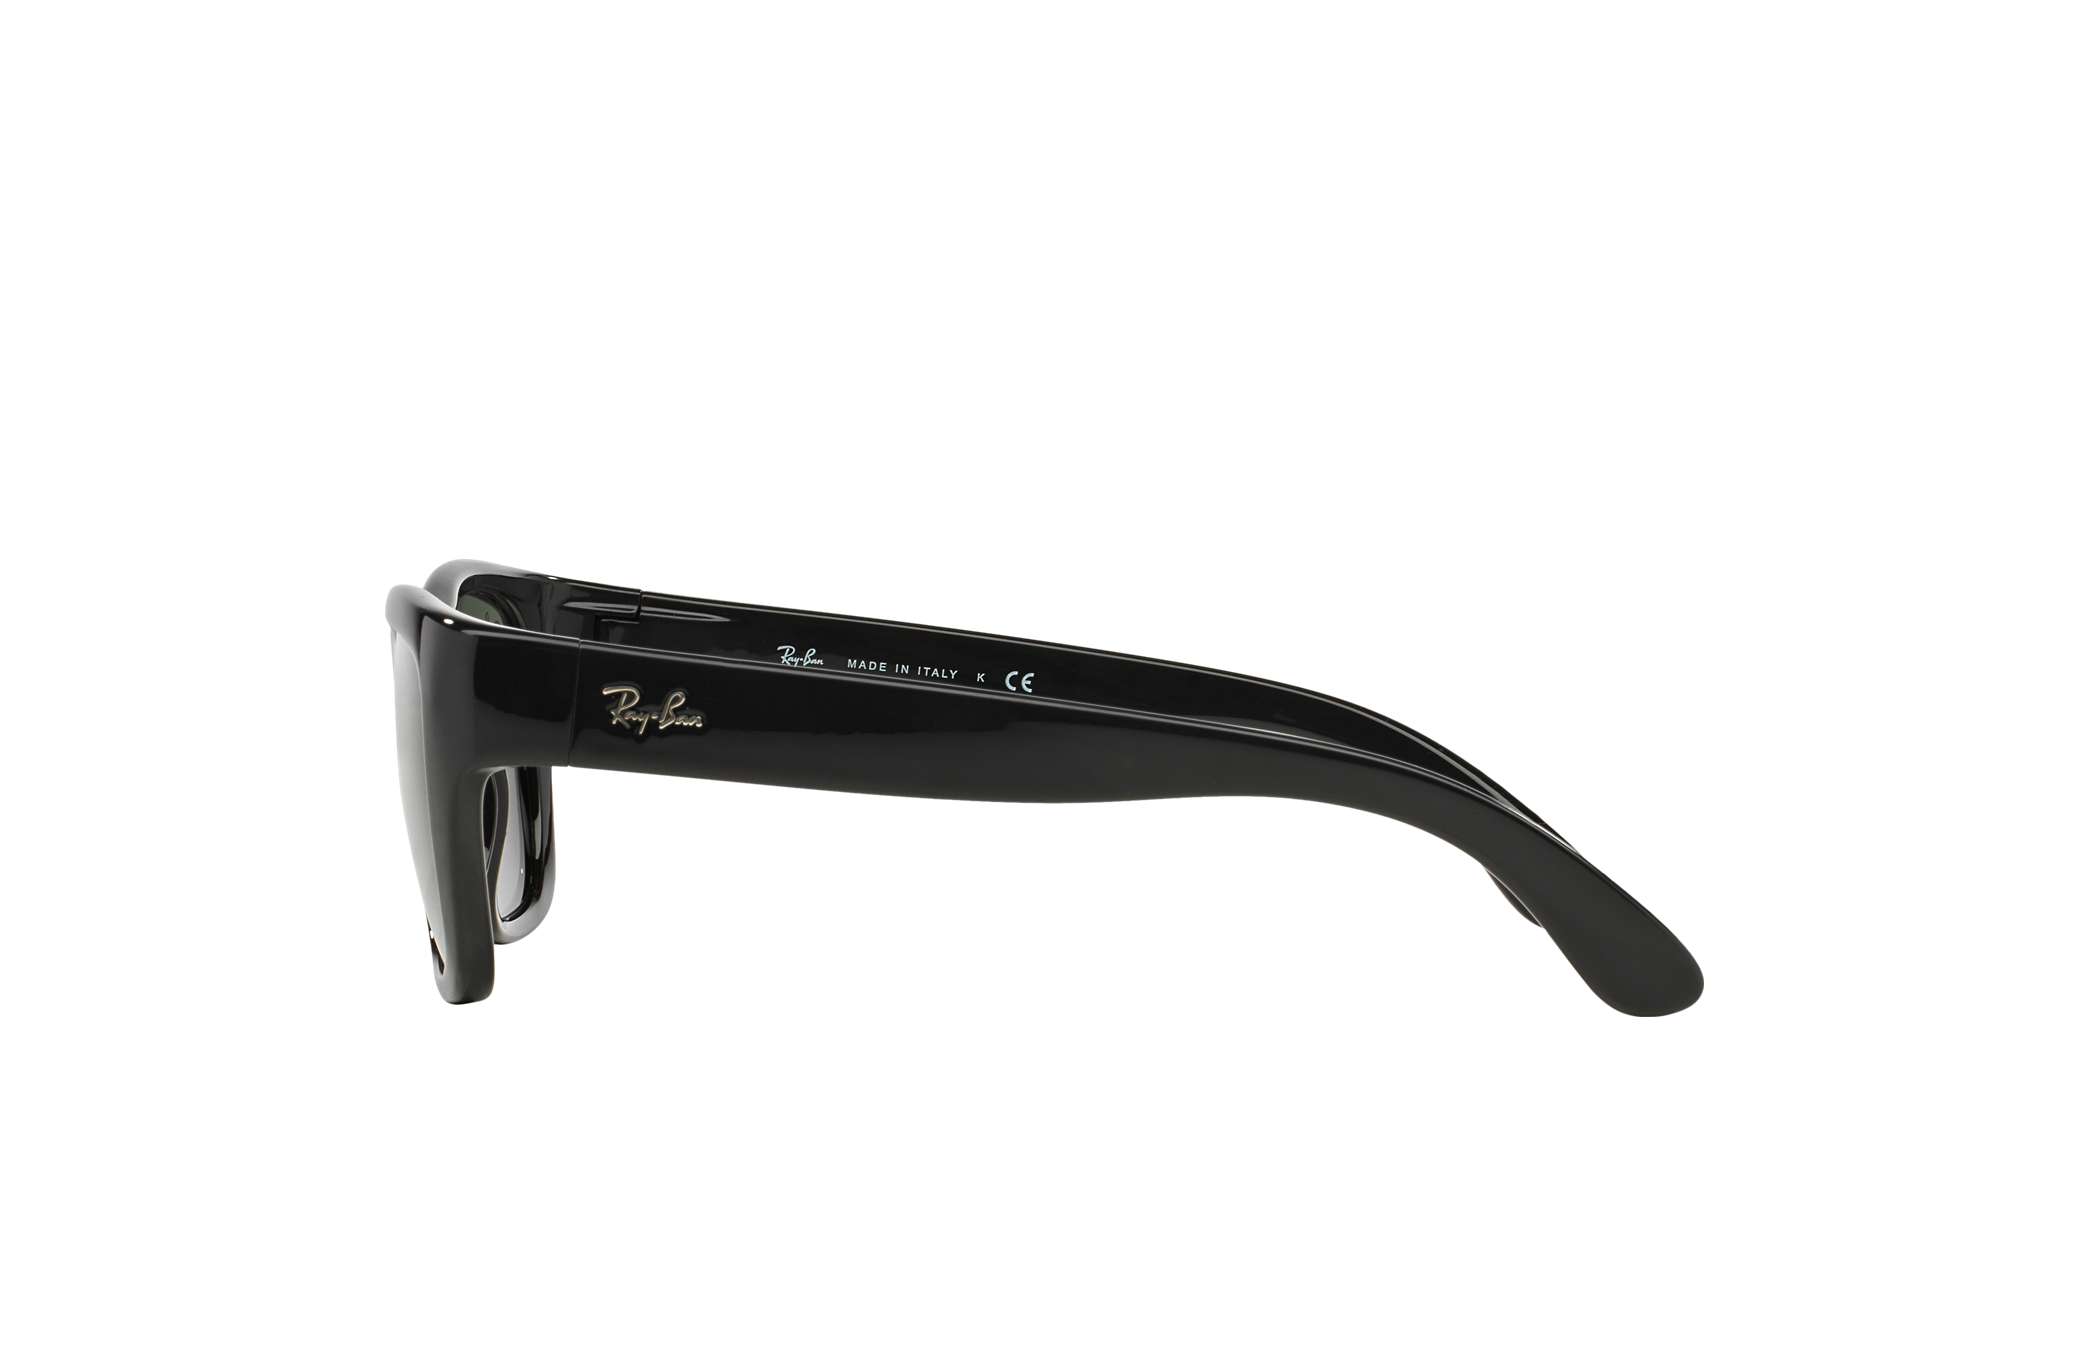 Rb4194 Sunglasses in Black and Green | Ray-Ban®